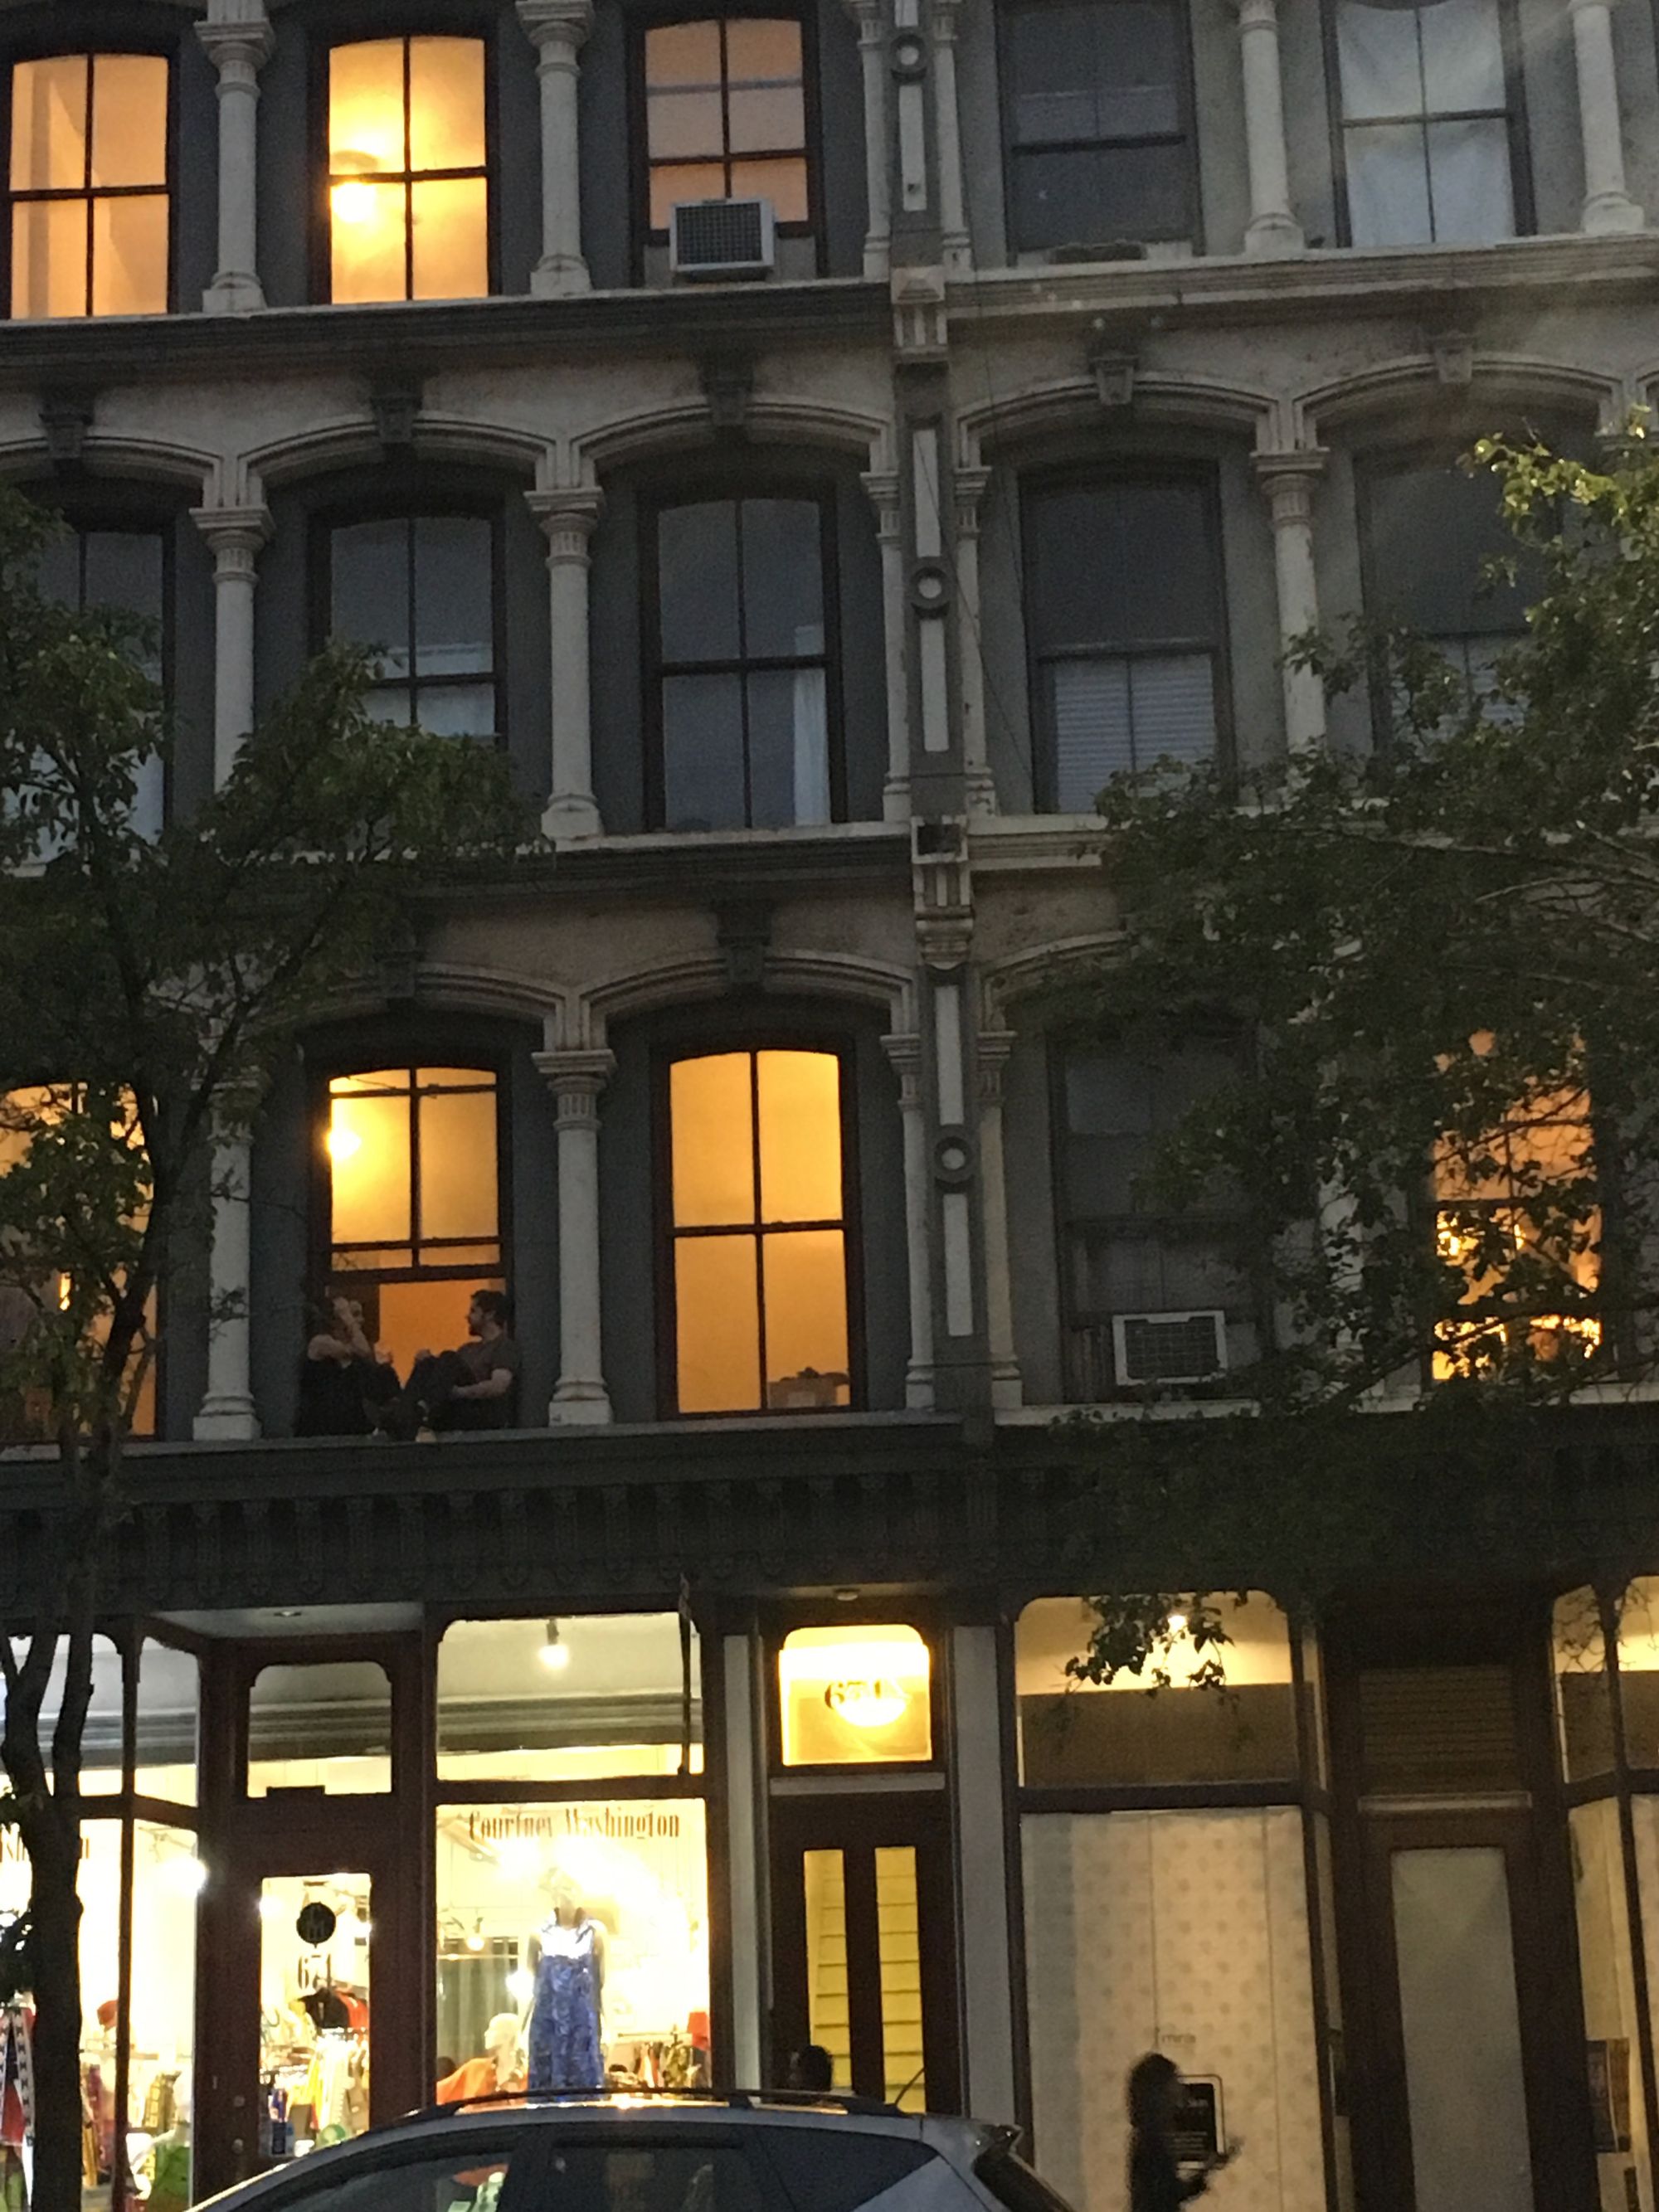 Photo of a New York City apartment's windows from the outside.